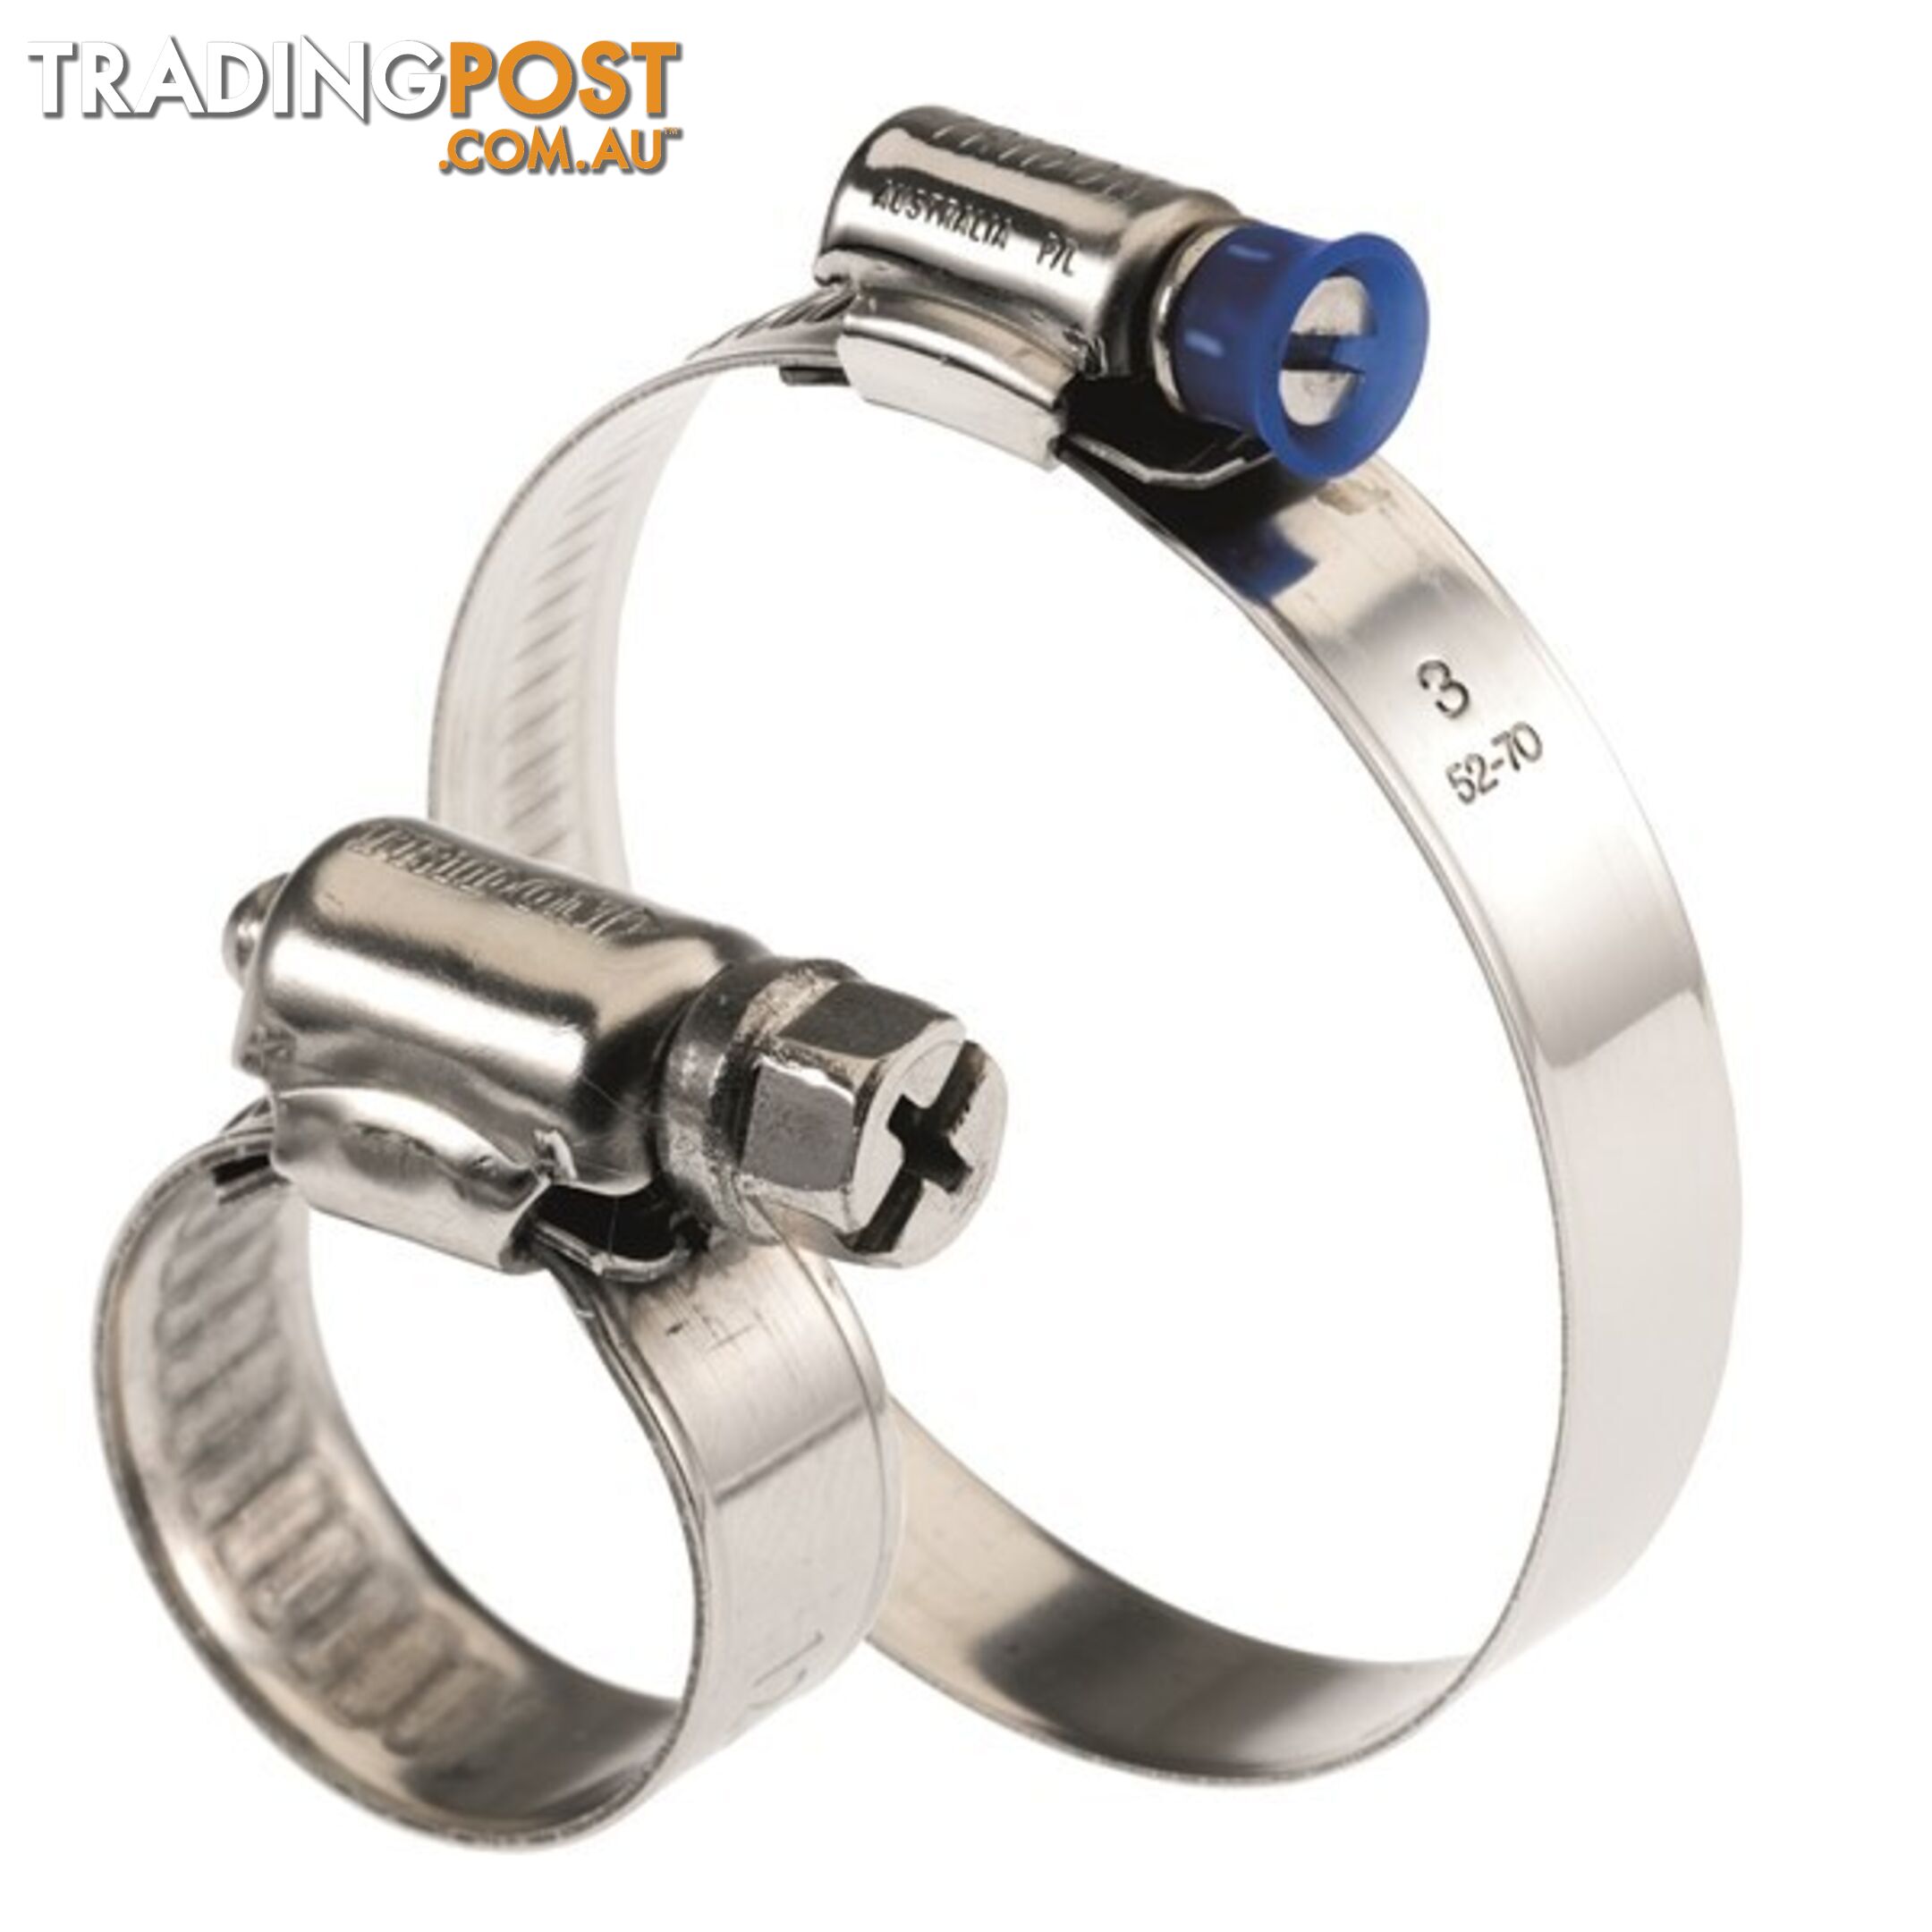 Tridon Hose Clamp 280 -305mm Regular Solid Band Collared Full S. Steel 10pk SKU - SMPC13